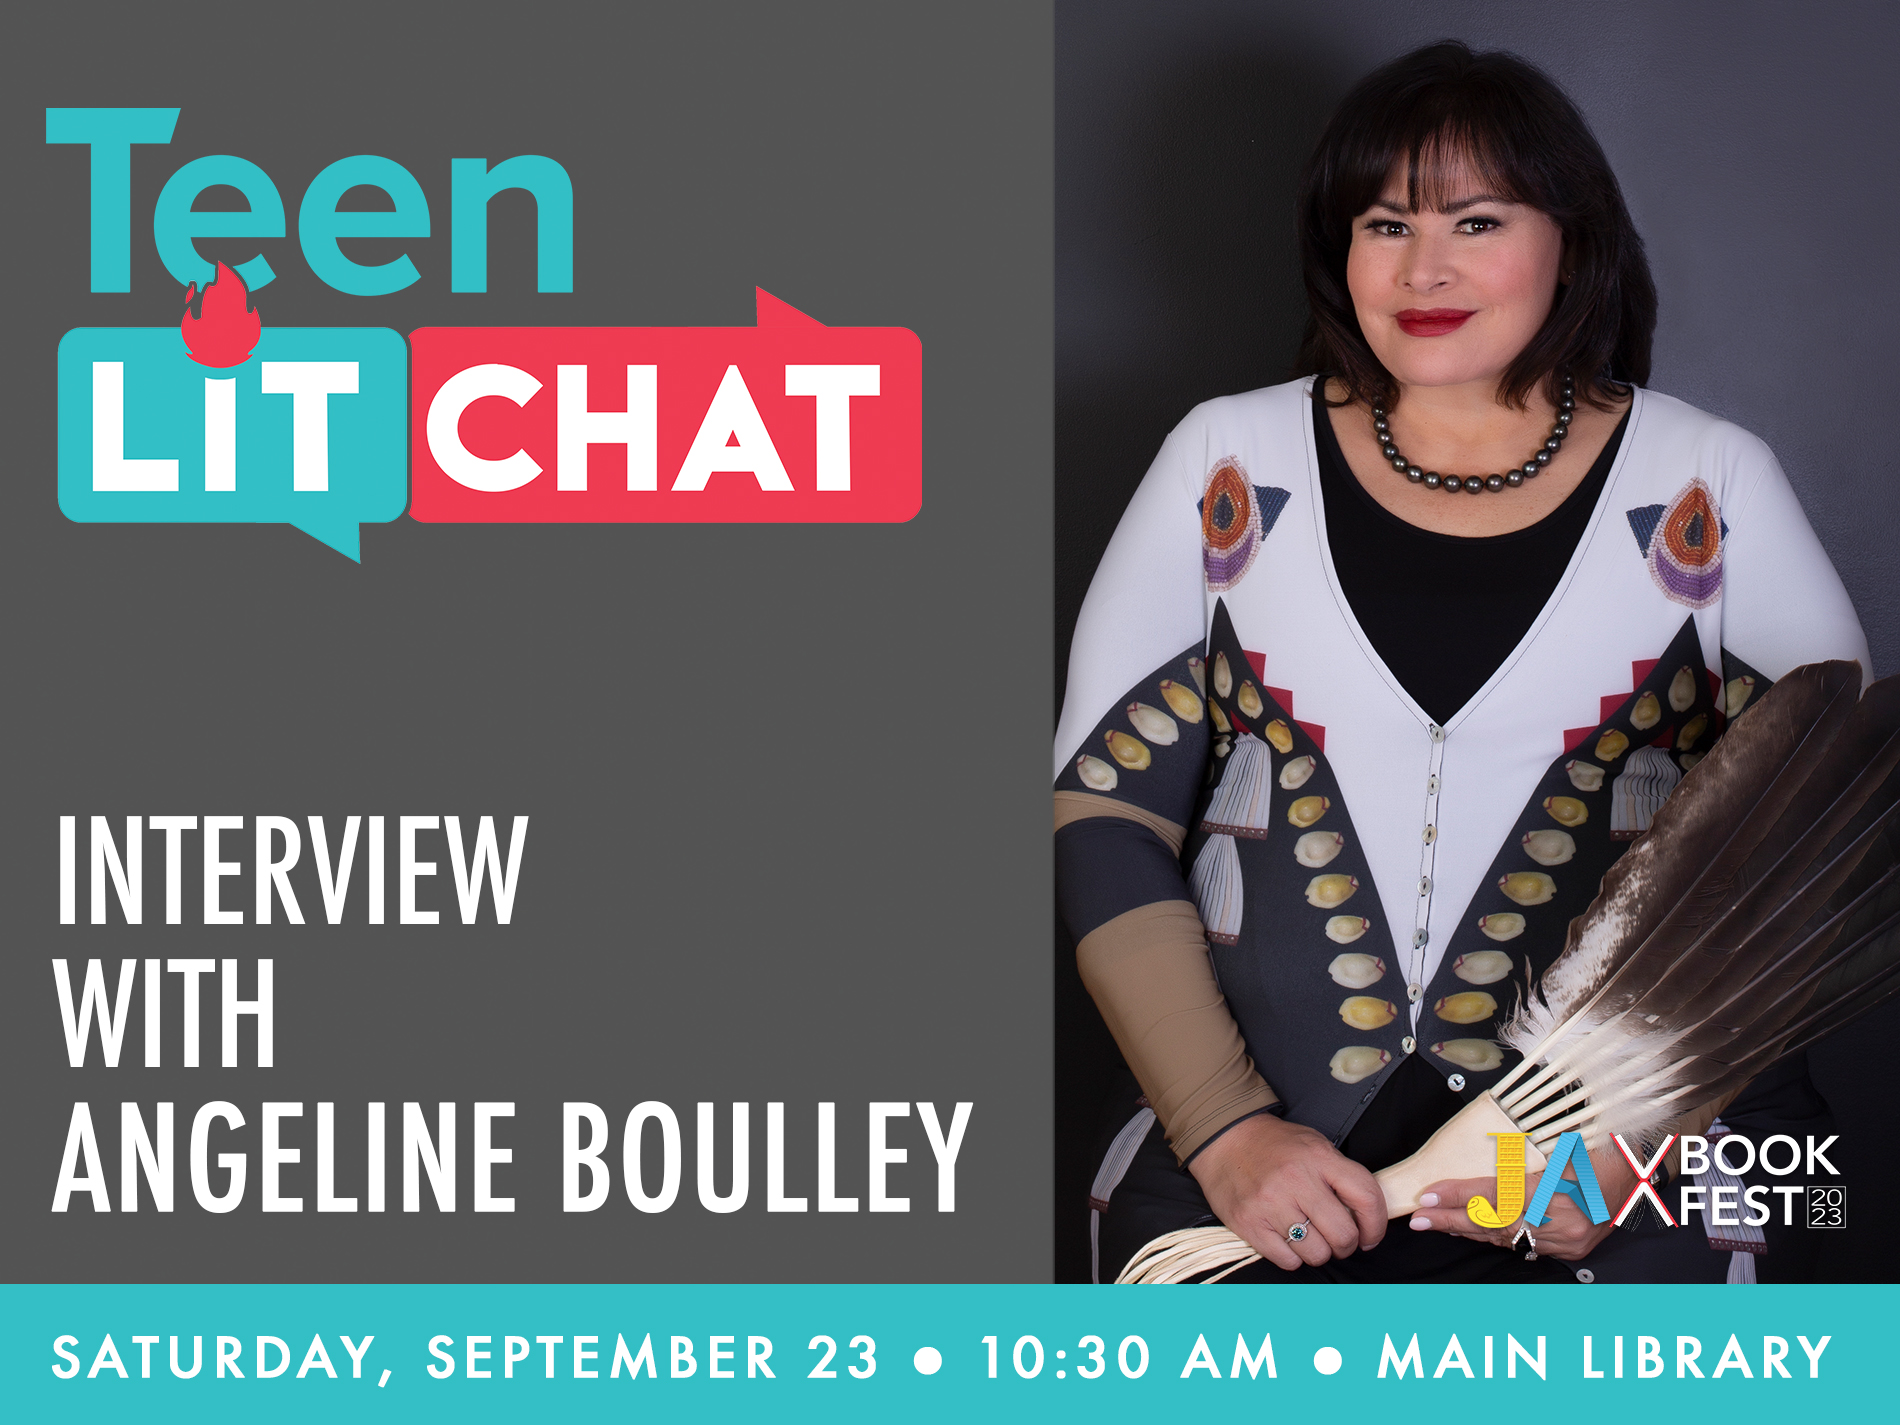 Teen Lit Chat Interview with Angeline Boulley